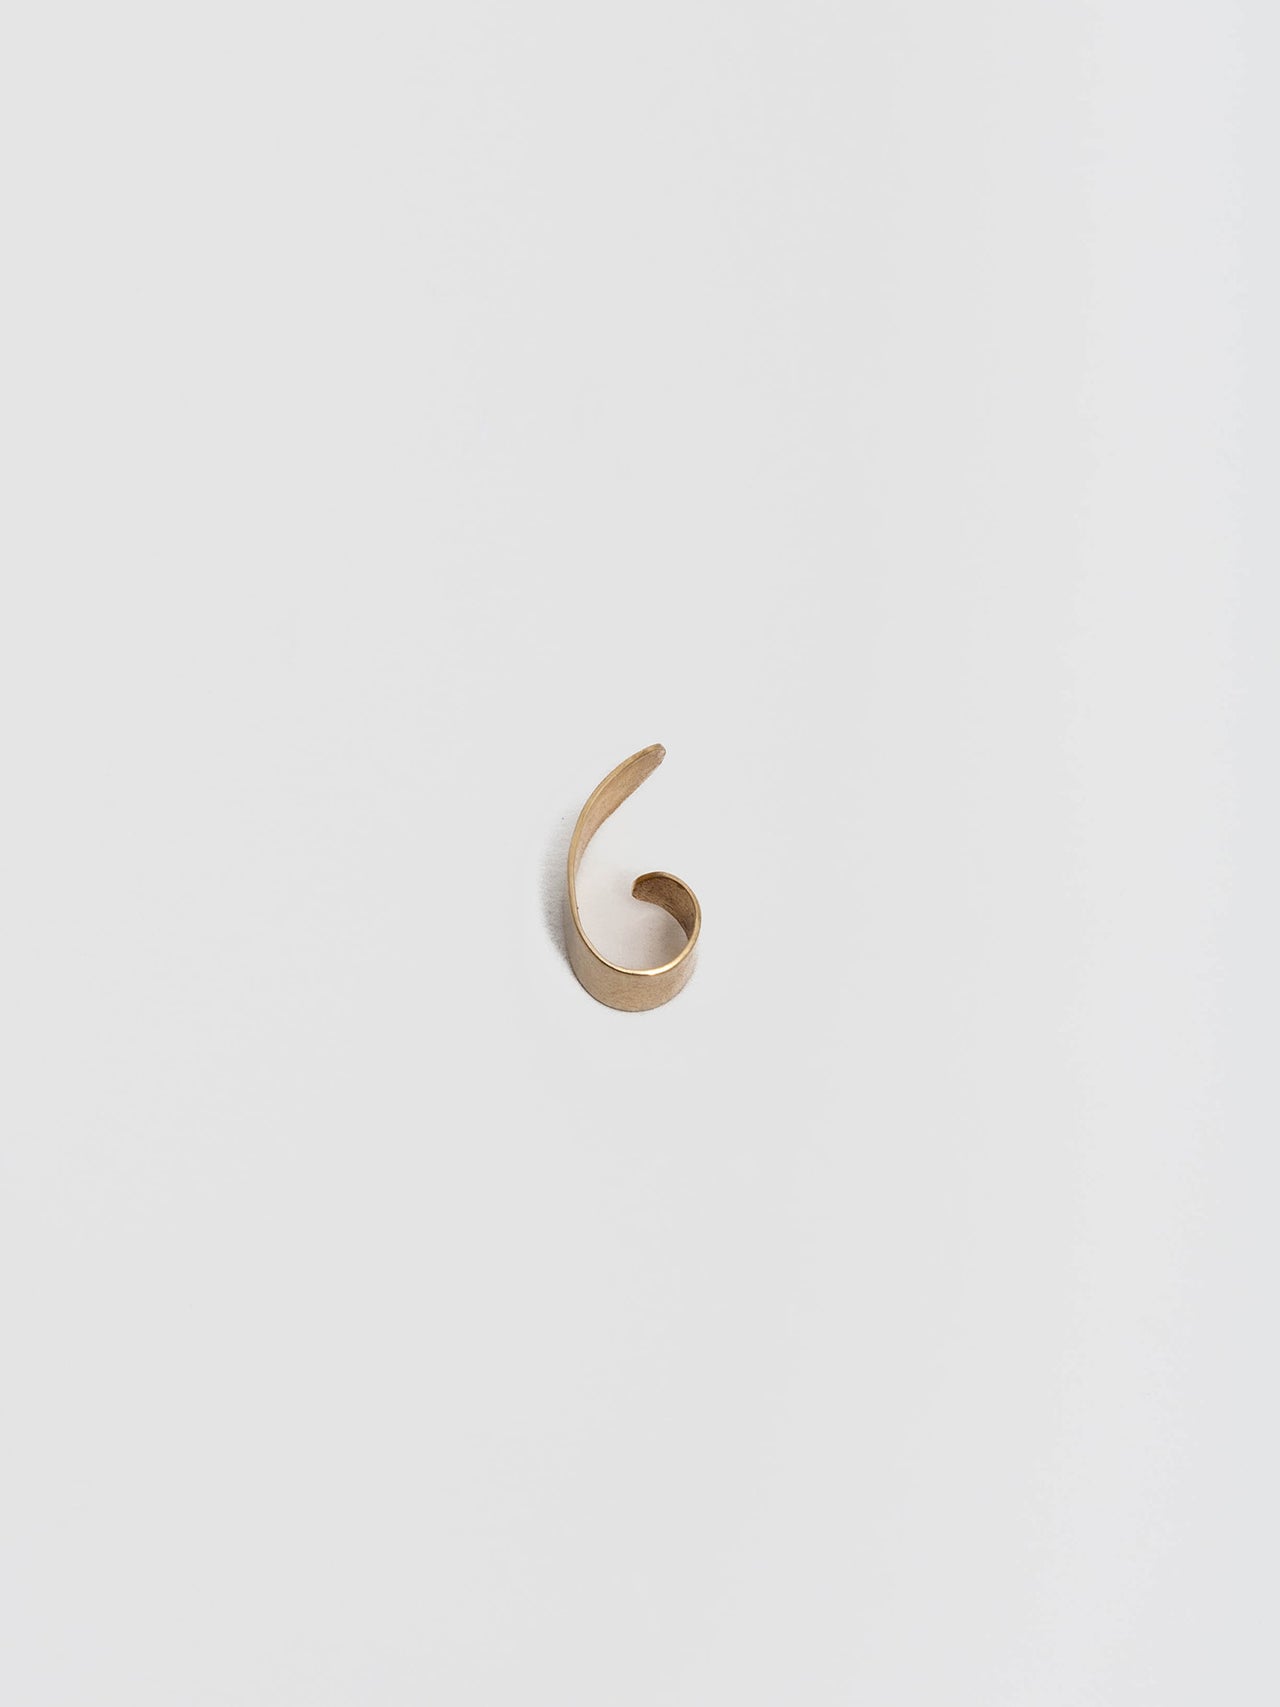 Birds eye view of 14kt Yellow Gold Ear Cuff pictured on light grey background.